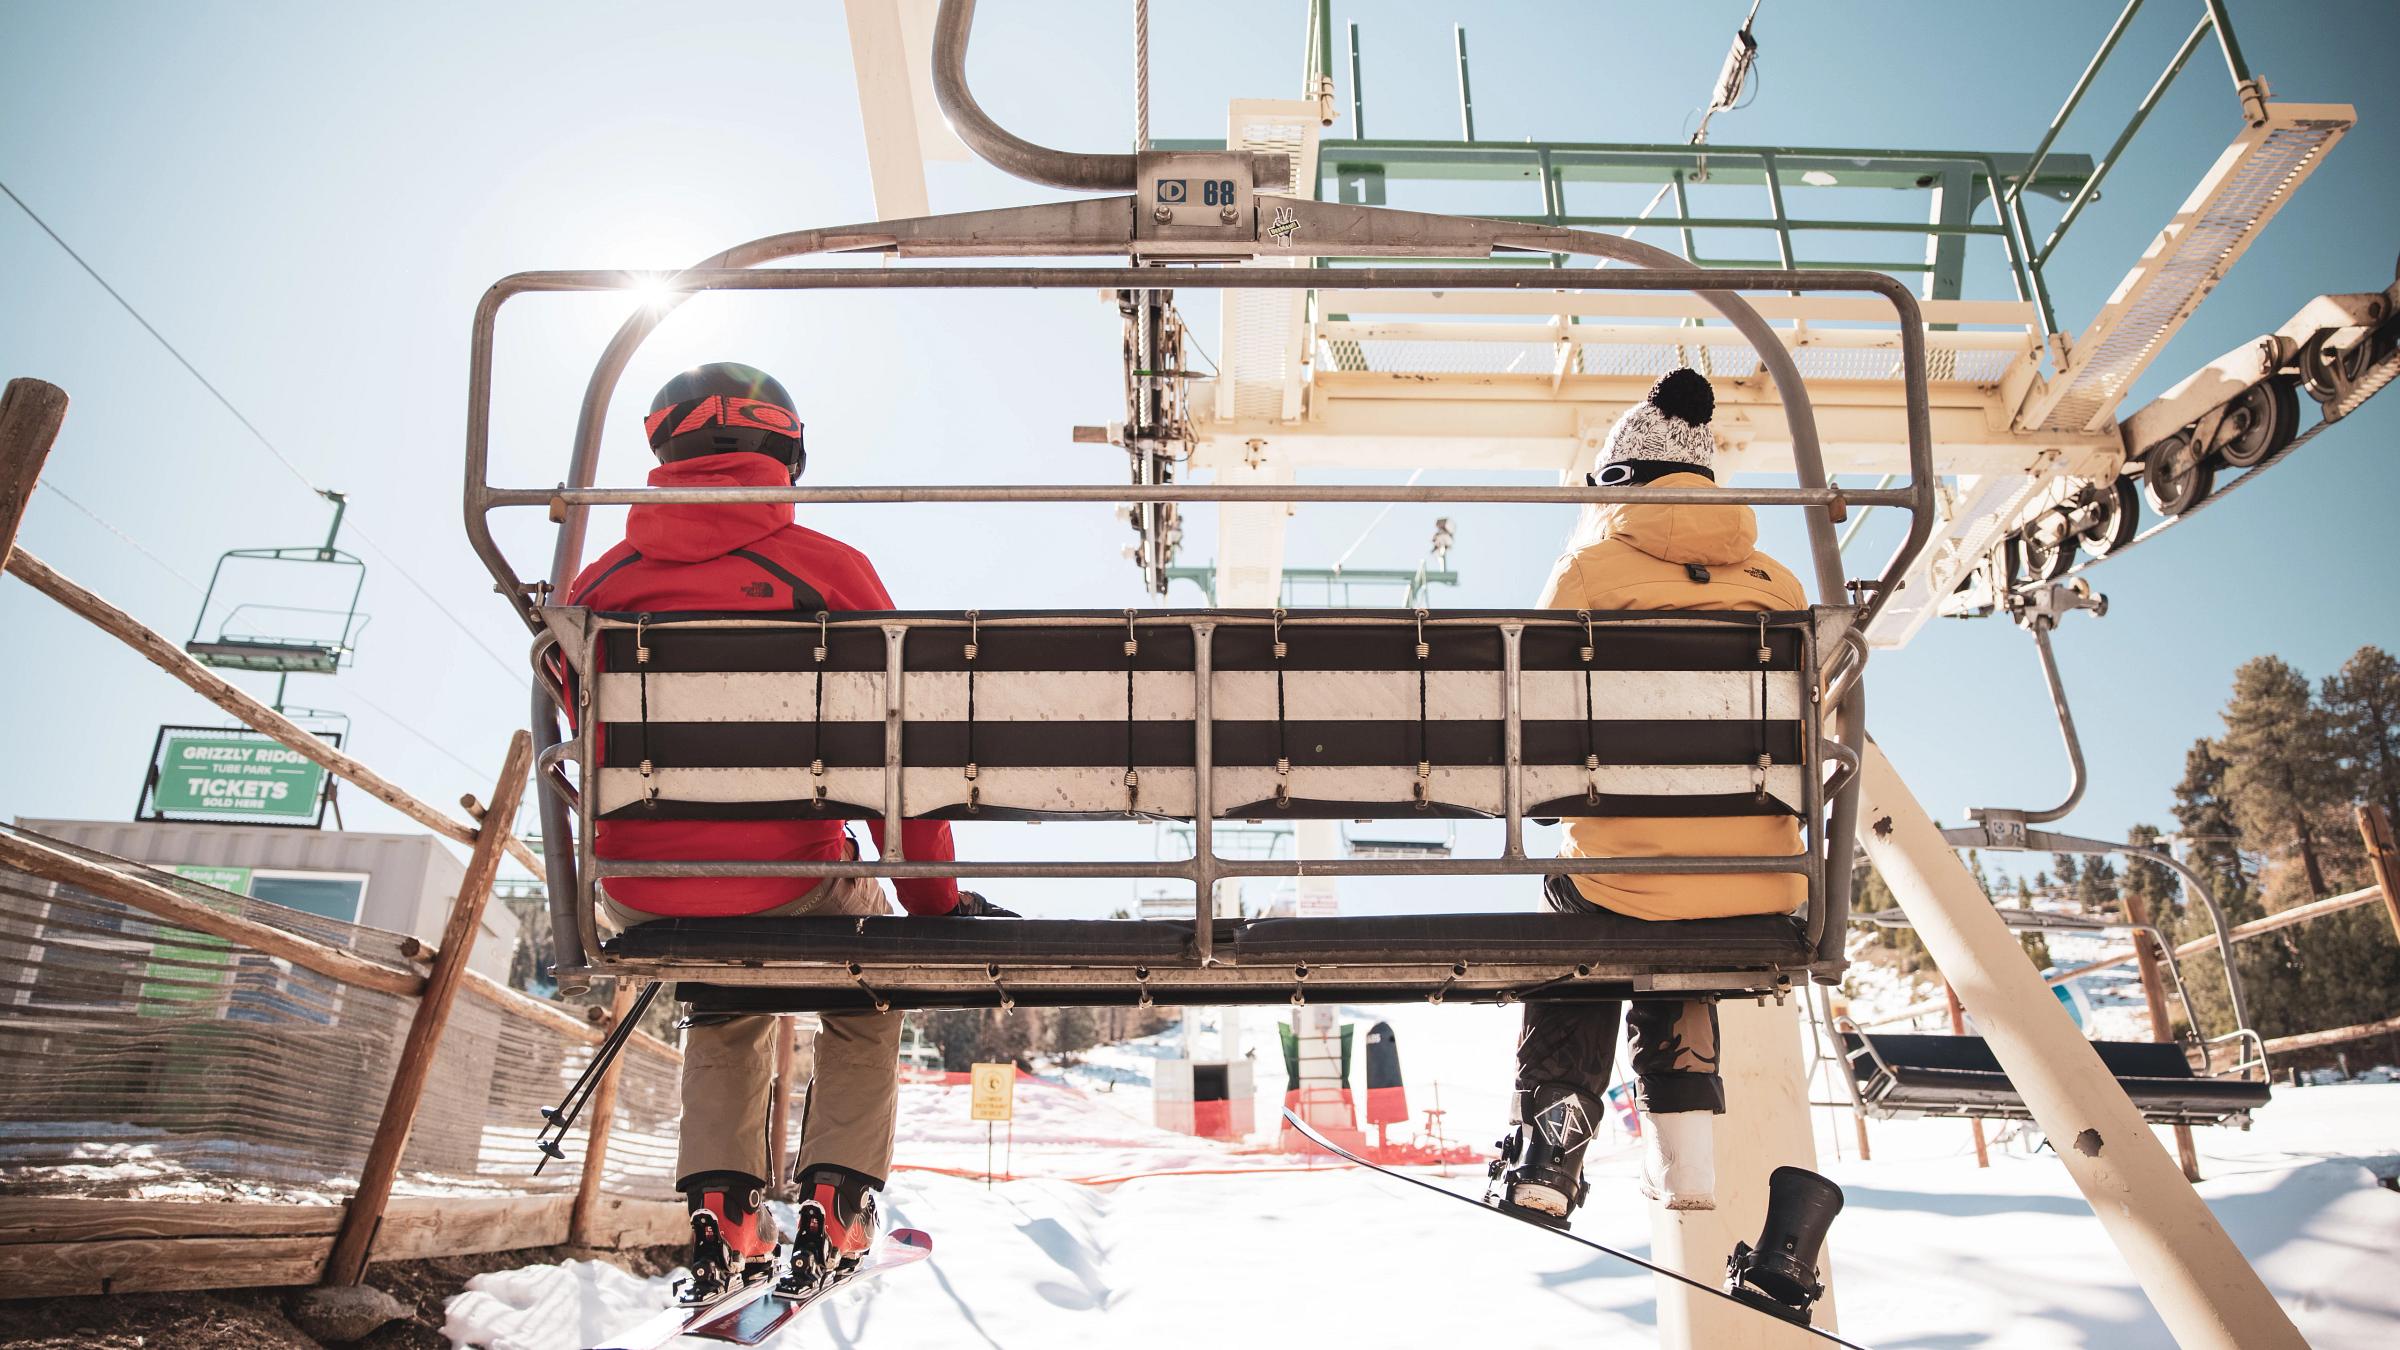 A skier and snowboarder going up on a chairlift.